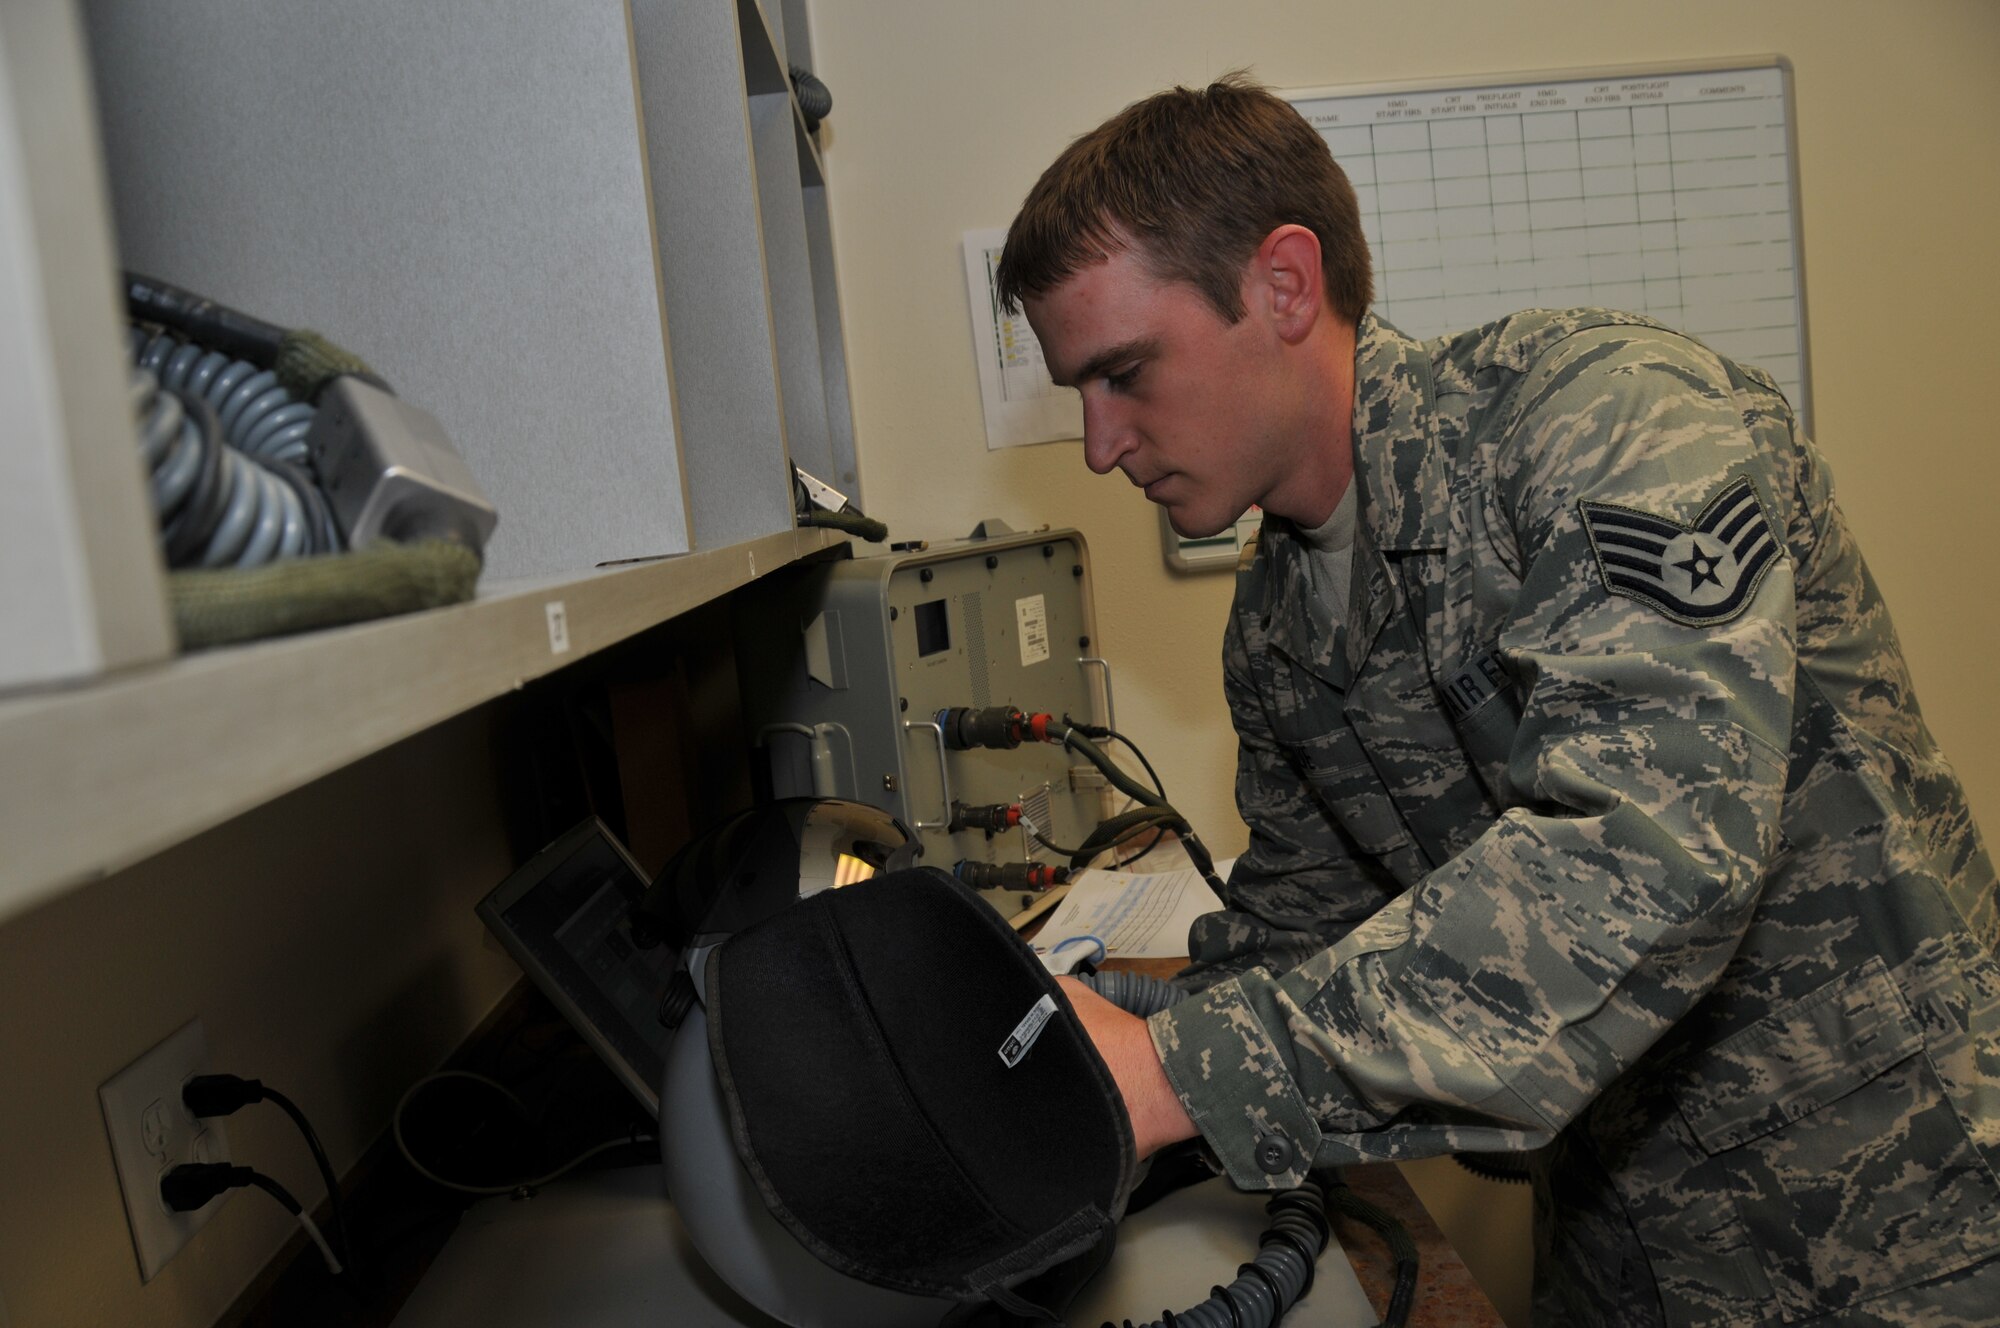 120th Fighter Wing Senior Airman Neil Kolve inspects a helmet during a post-flight check in the Aircrew Flight Equipment section on June 24, 2011.
(U.S. Air Force photo by Senior Master Sgt. Eric Peterson.)